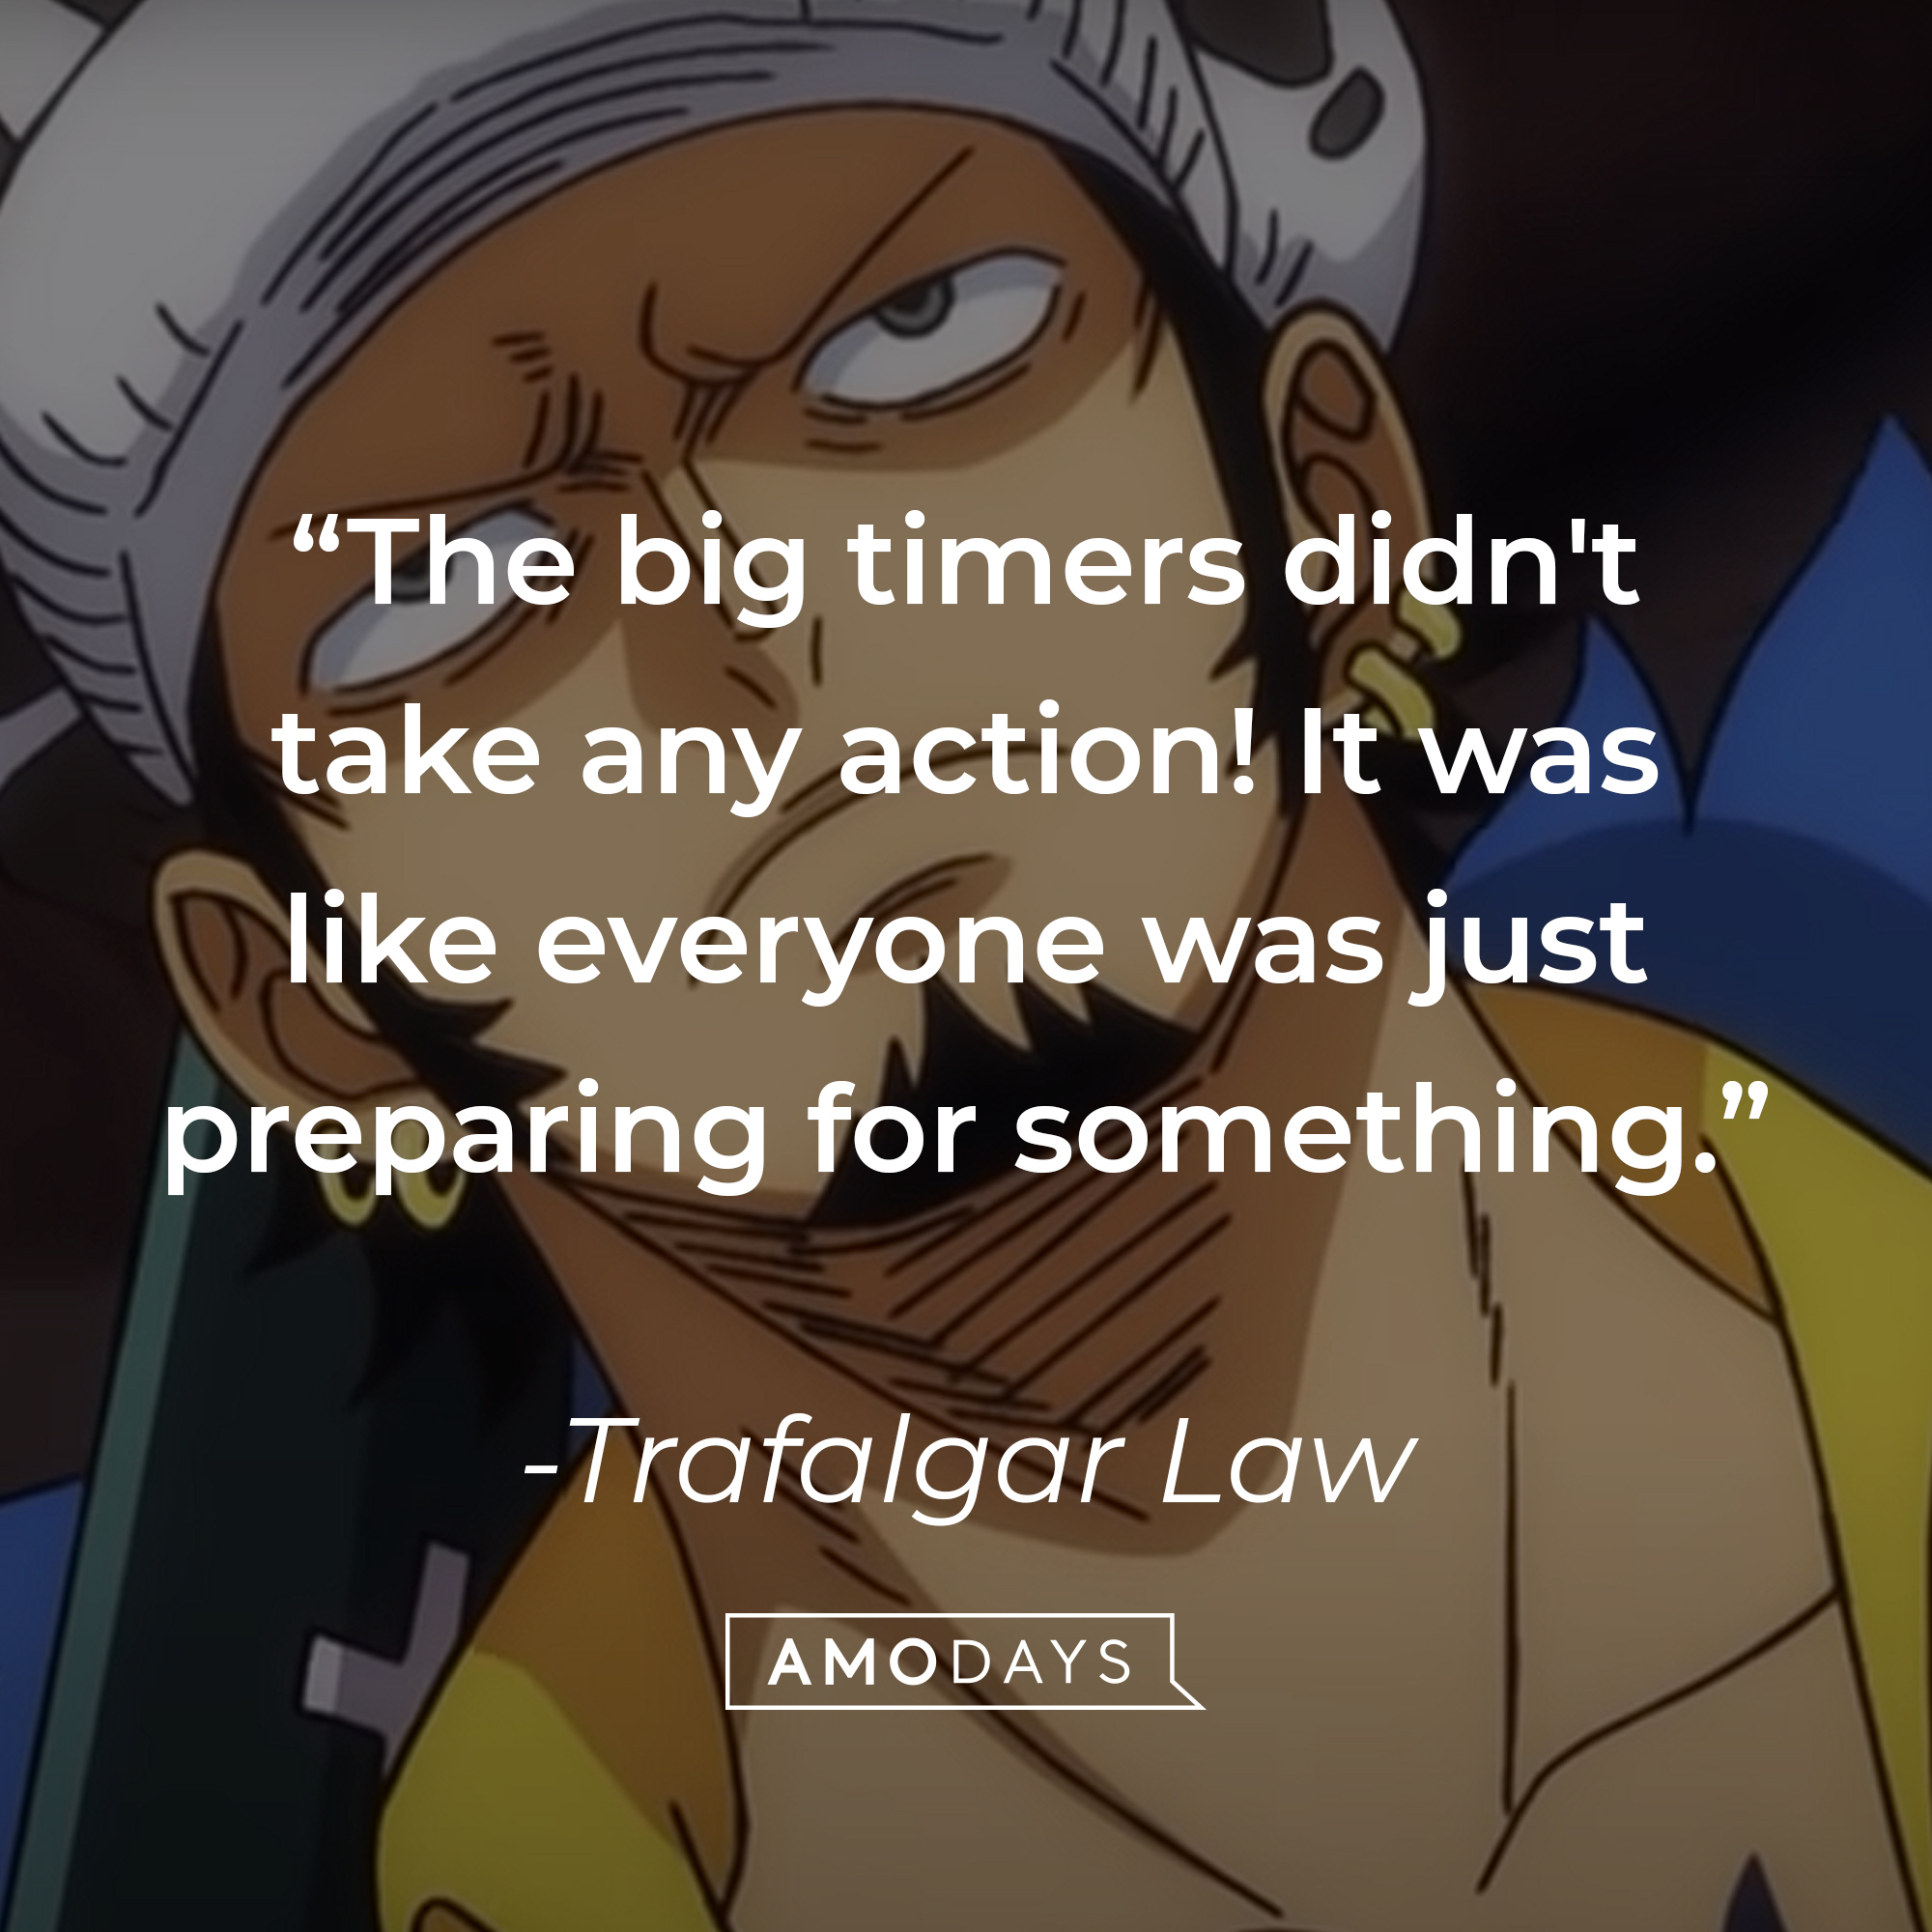 Trafalgar Law’s quote: "The big timers didn't take any action! It was like everyone was just preparing for something." | Image: AmoDays